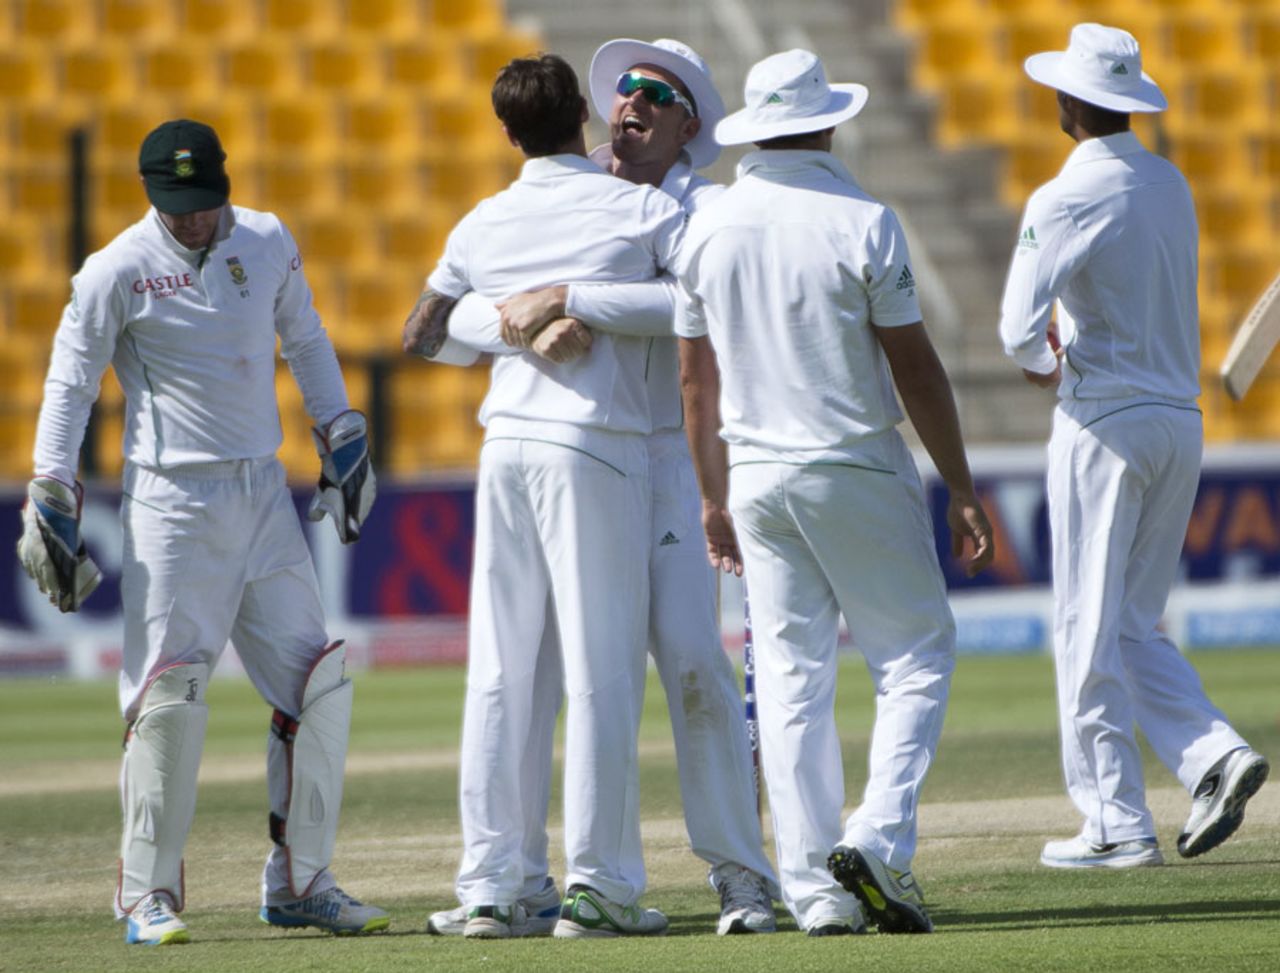 Graeme Smith celebrates Misbah-ul-Haq's wicket with his team-mates, Pakistan v South Africa, 1st Test, 3rd day, Abu Dhabi, October 16, 2013